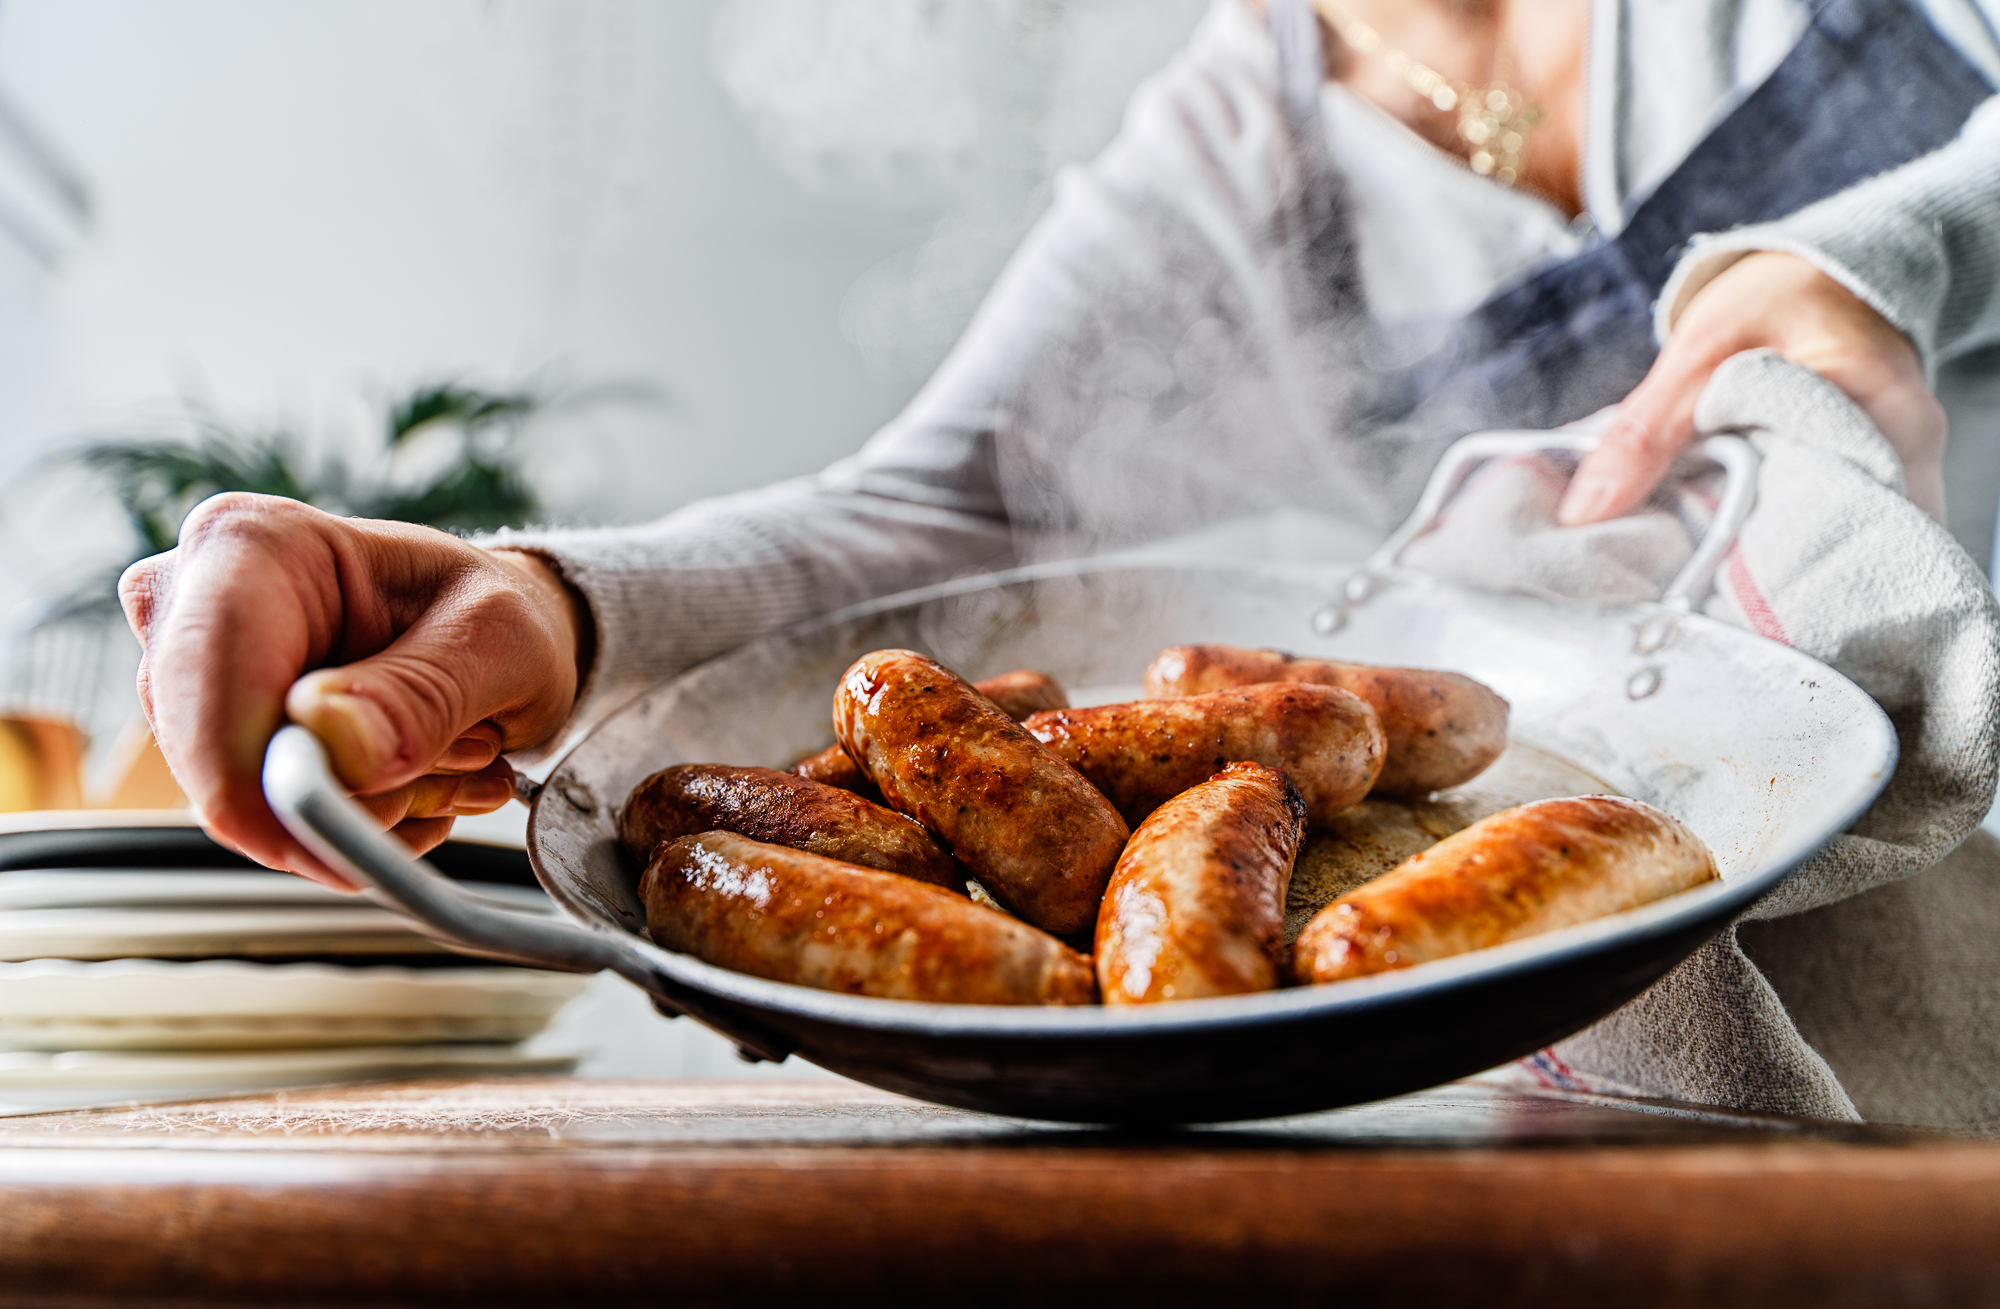 03_pan_fried_sausages_with_hands_0584